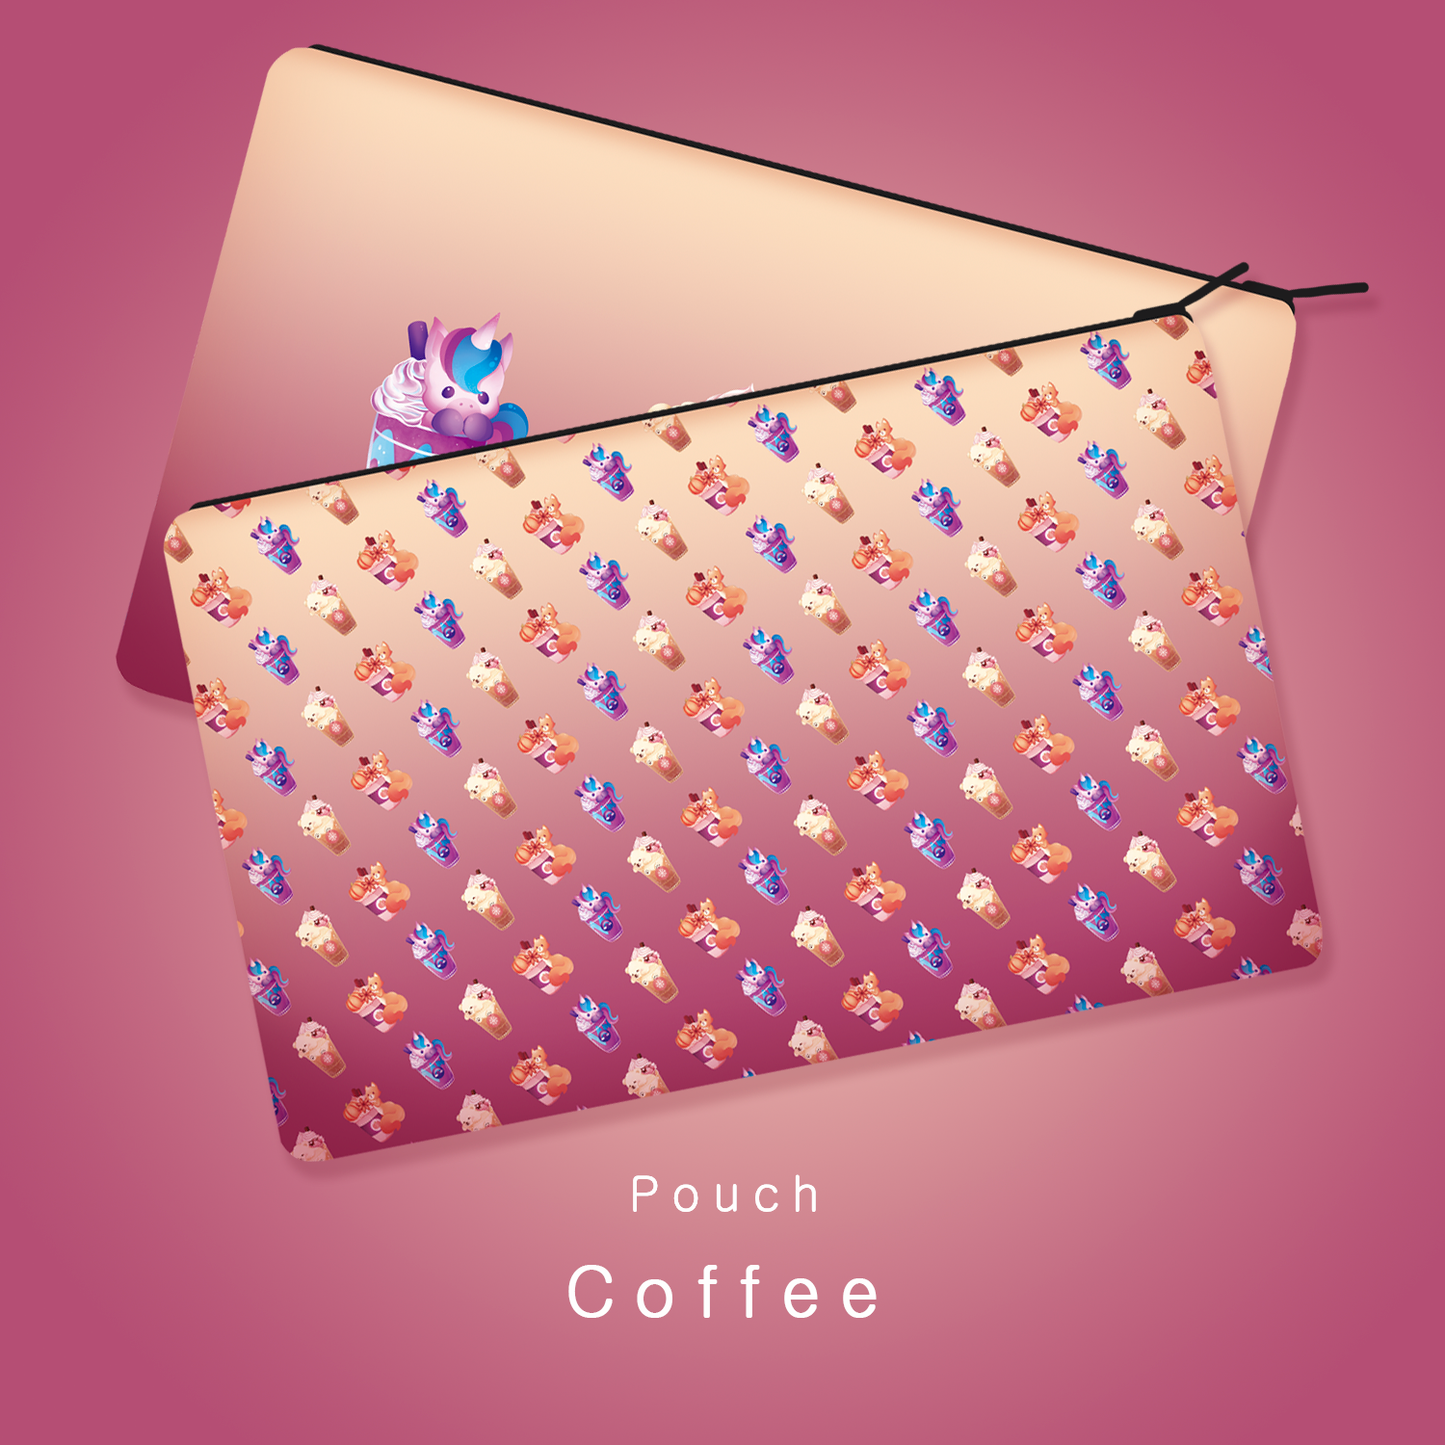 Coffee - Pouch